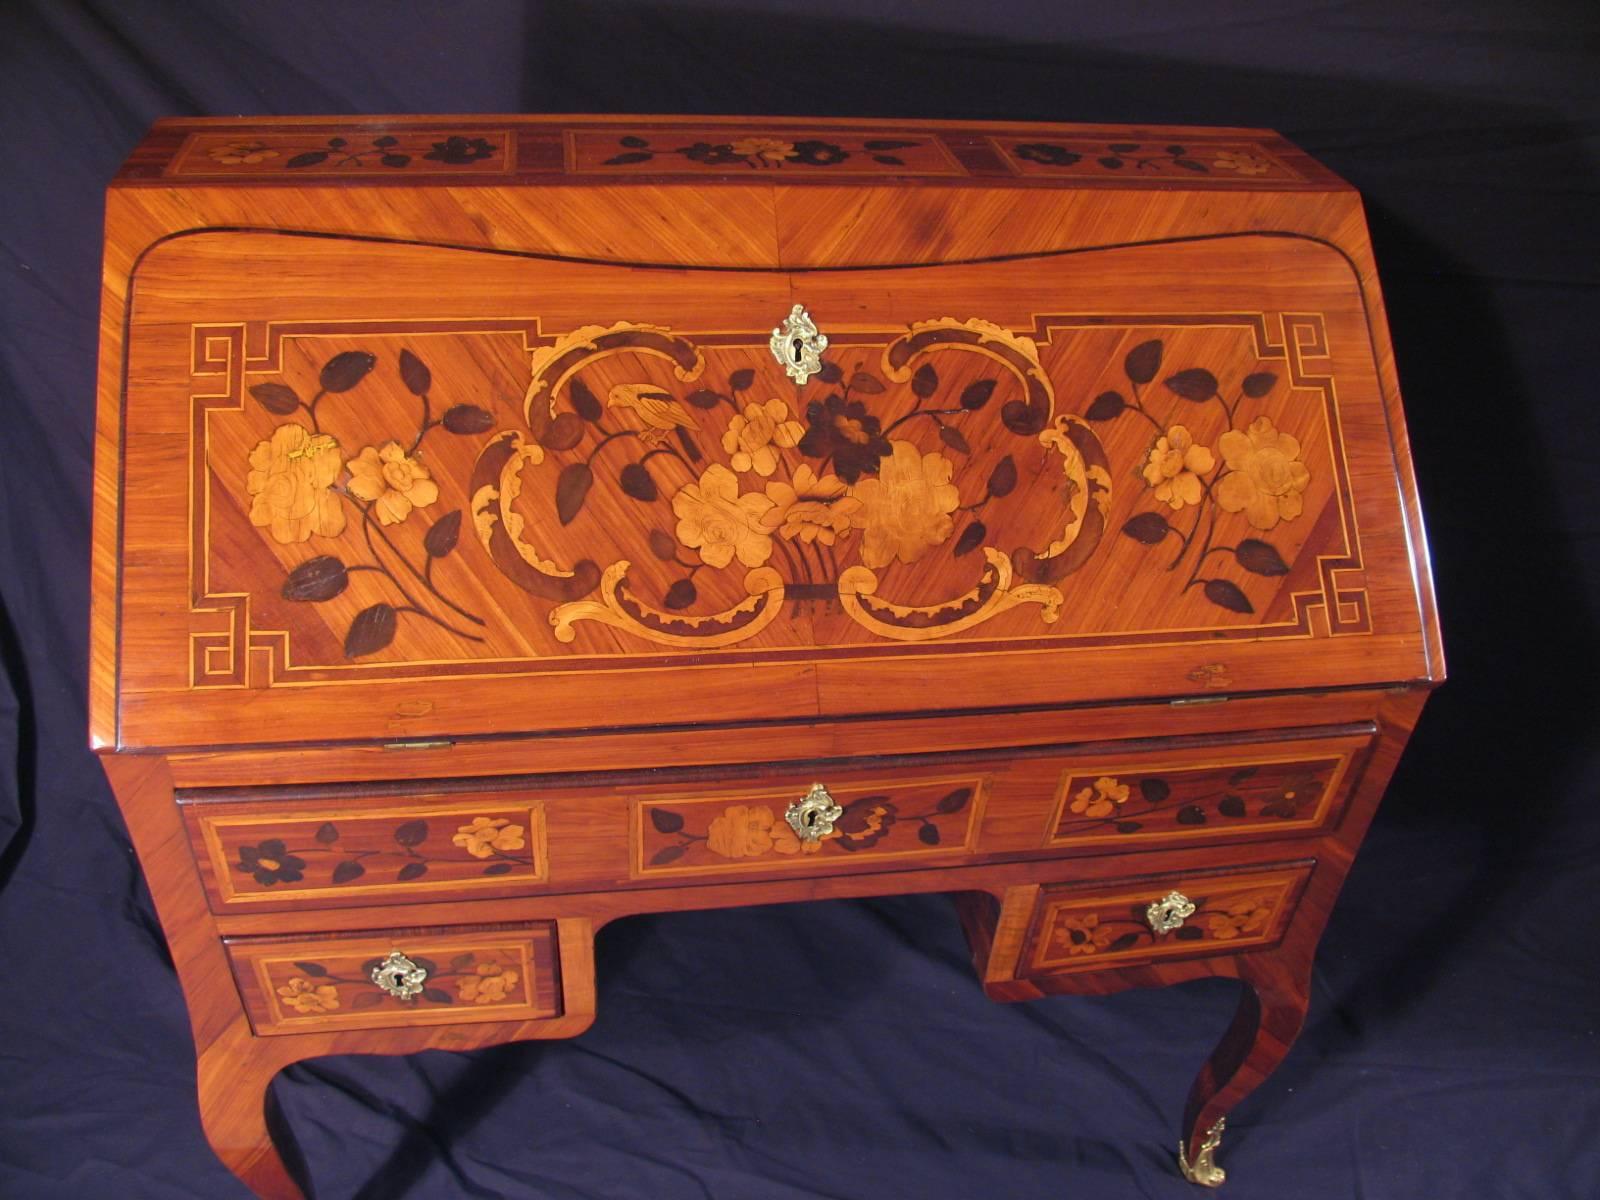 Exceptional French Louis XV secretary with beautiful flower and bird marquetry. This extraordinary piece dates back to circa 1770.
The inside is decorated with four drawers and two open compartments.
The sides and front show matching marquetry